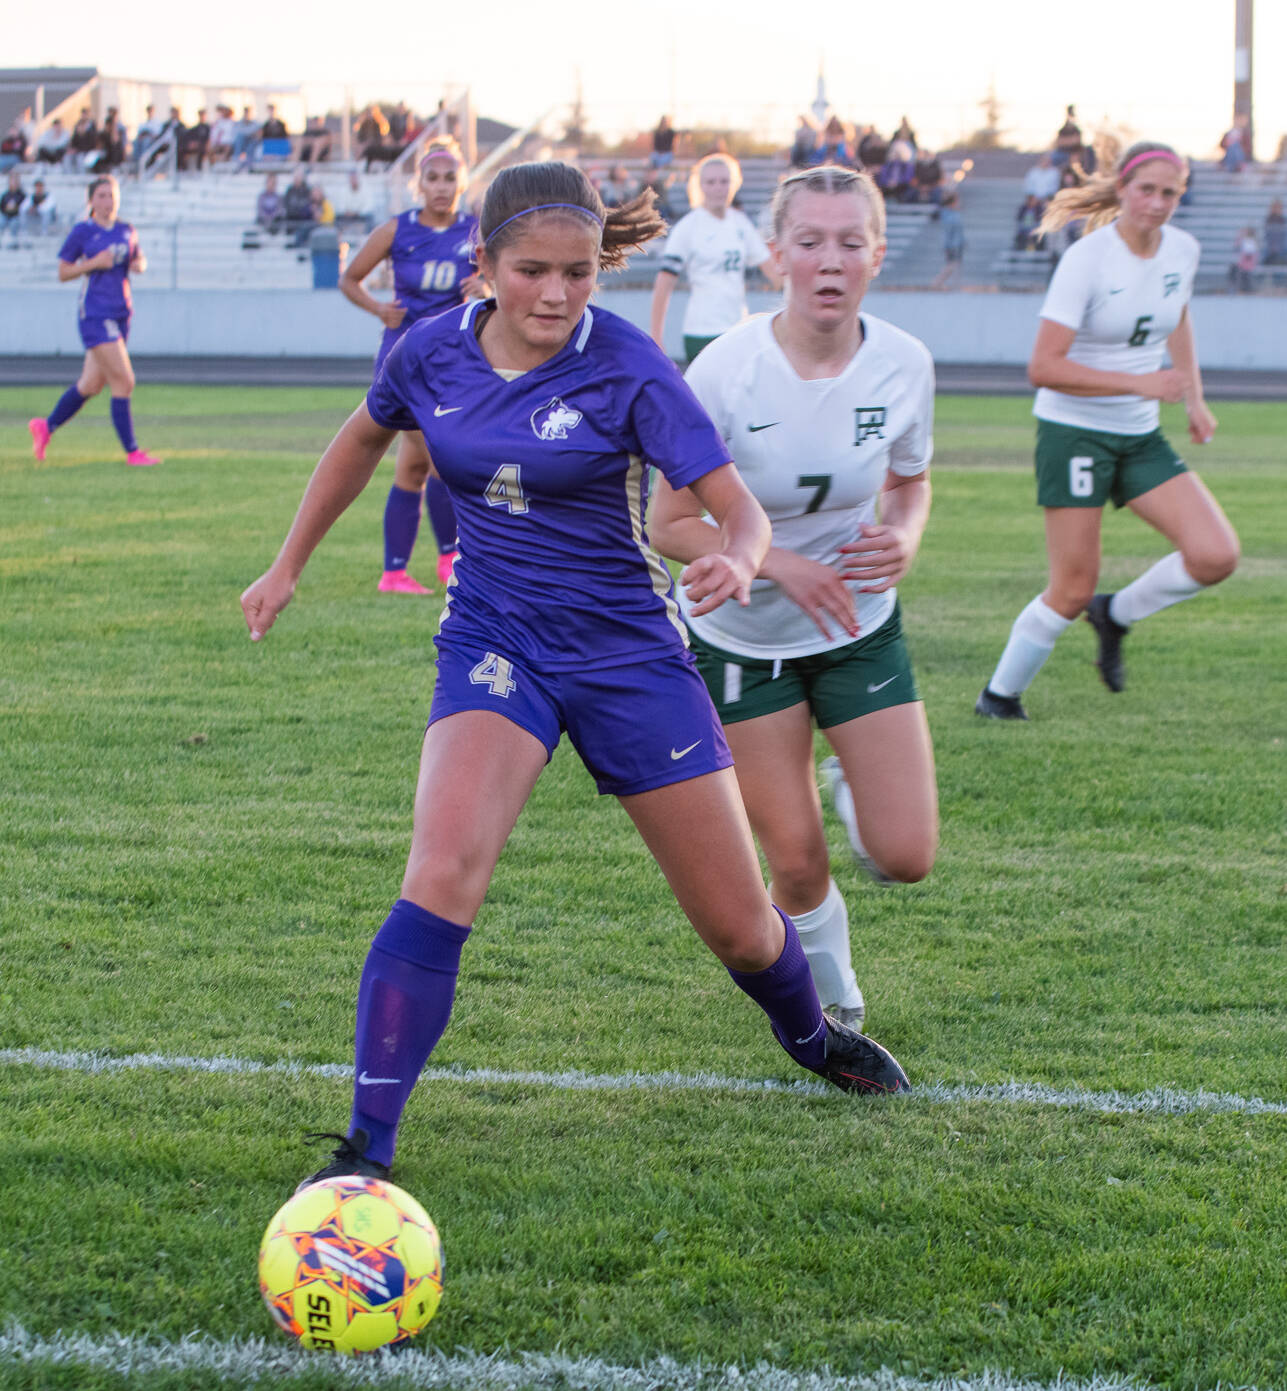 Sequim Gazette photo by Emily Matthiessen
Sequim’s Raimey Brewer, left gains possession as Port Angeles’ Izzy Felton pursues the play in a Sept. 14 Olympic League match-up in Sequim. The host Wolves won, 2-1.